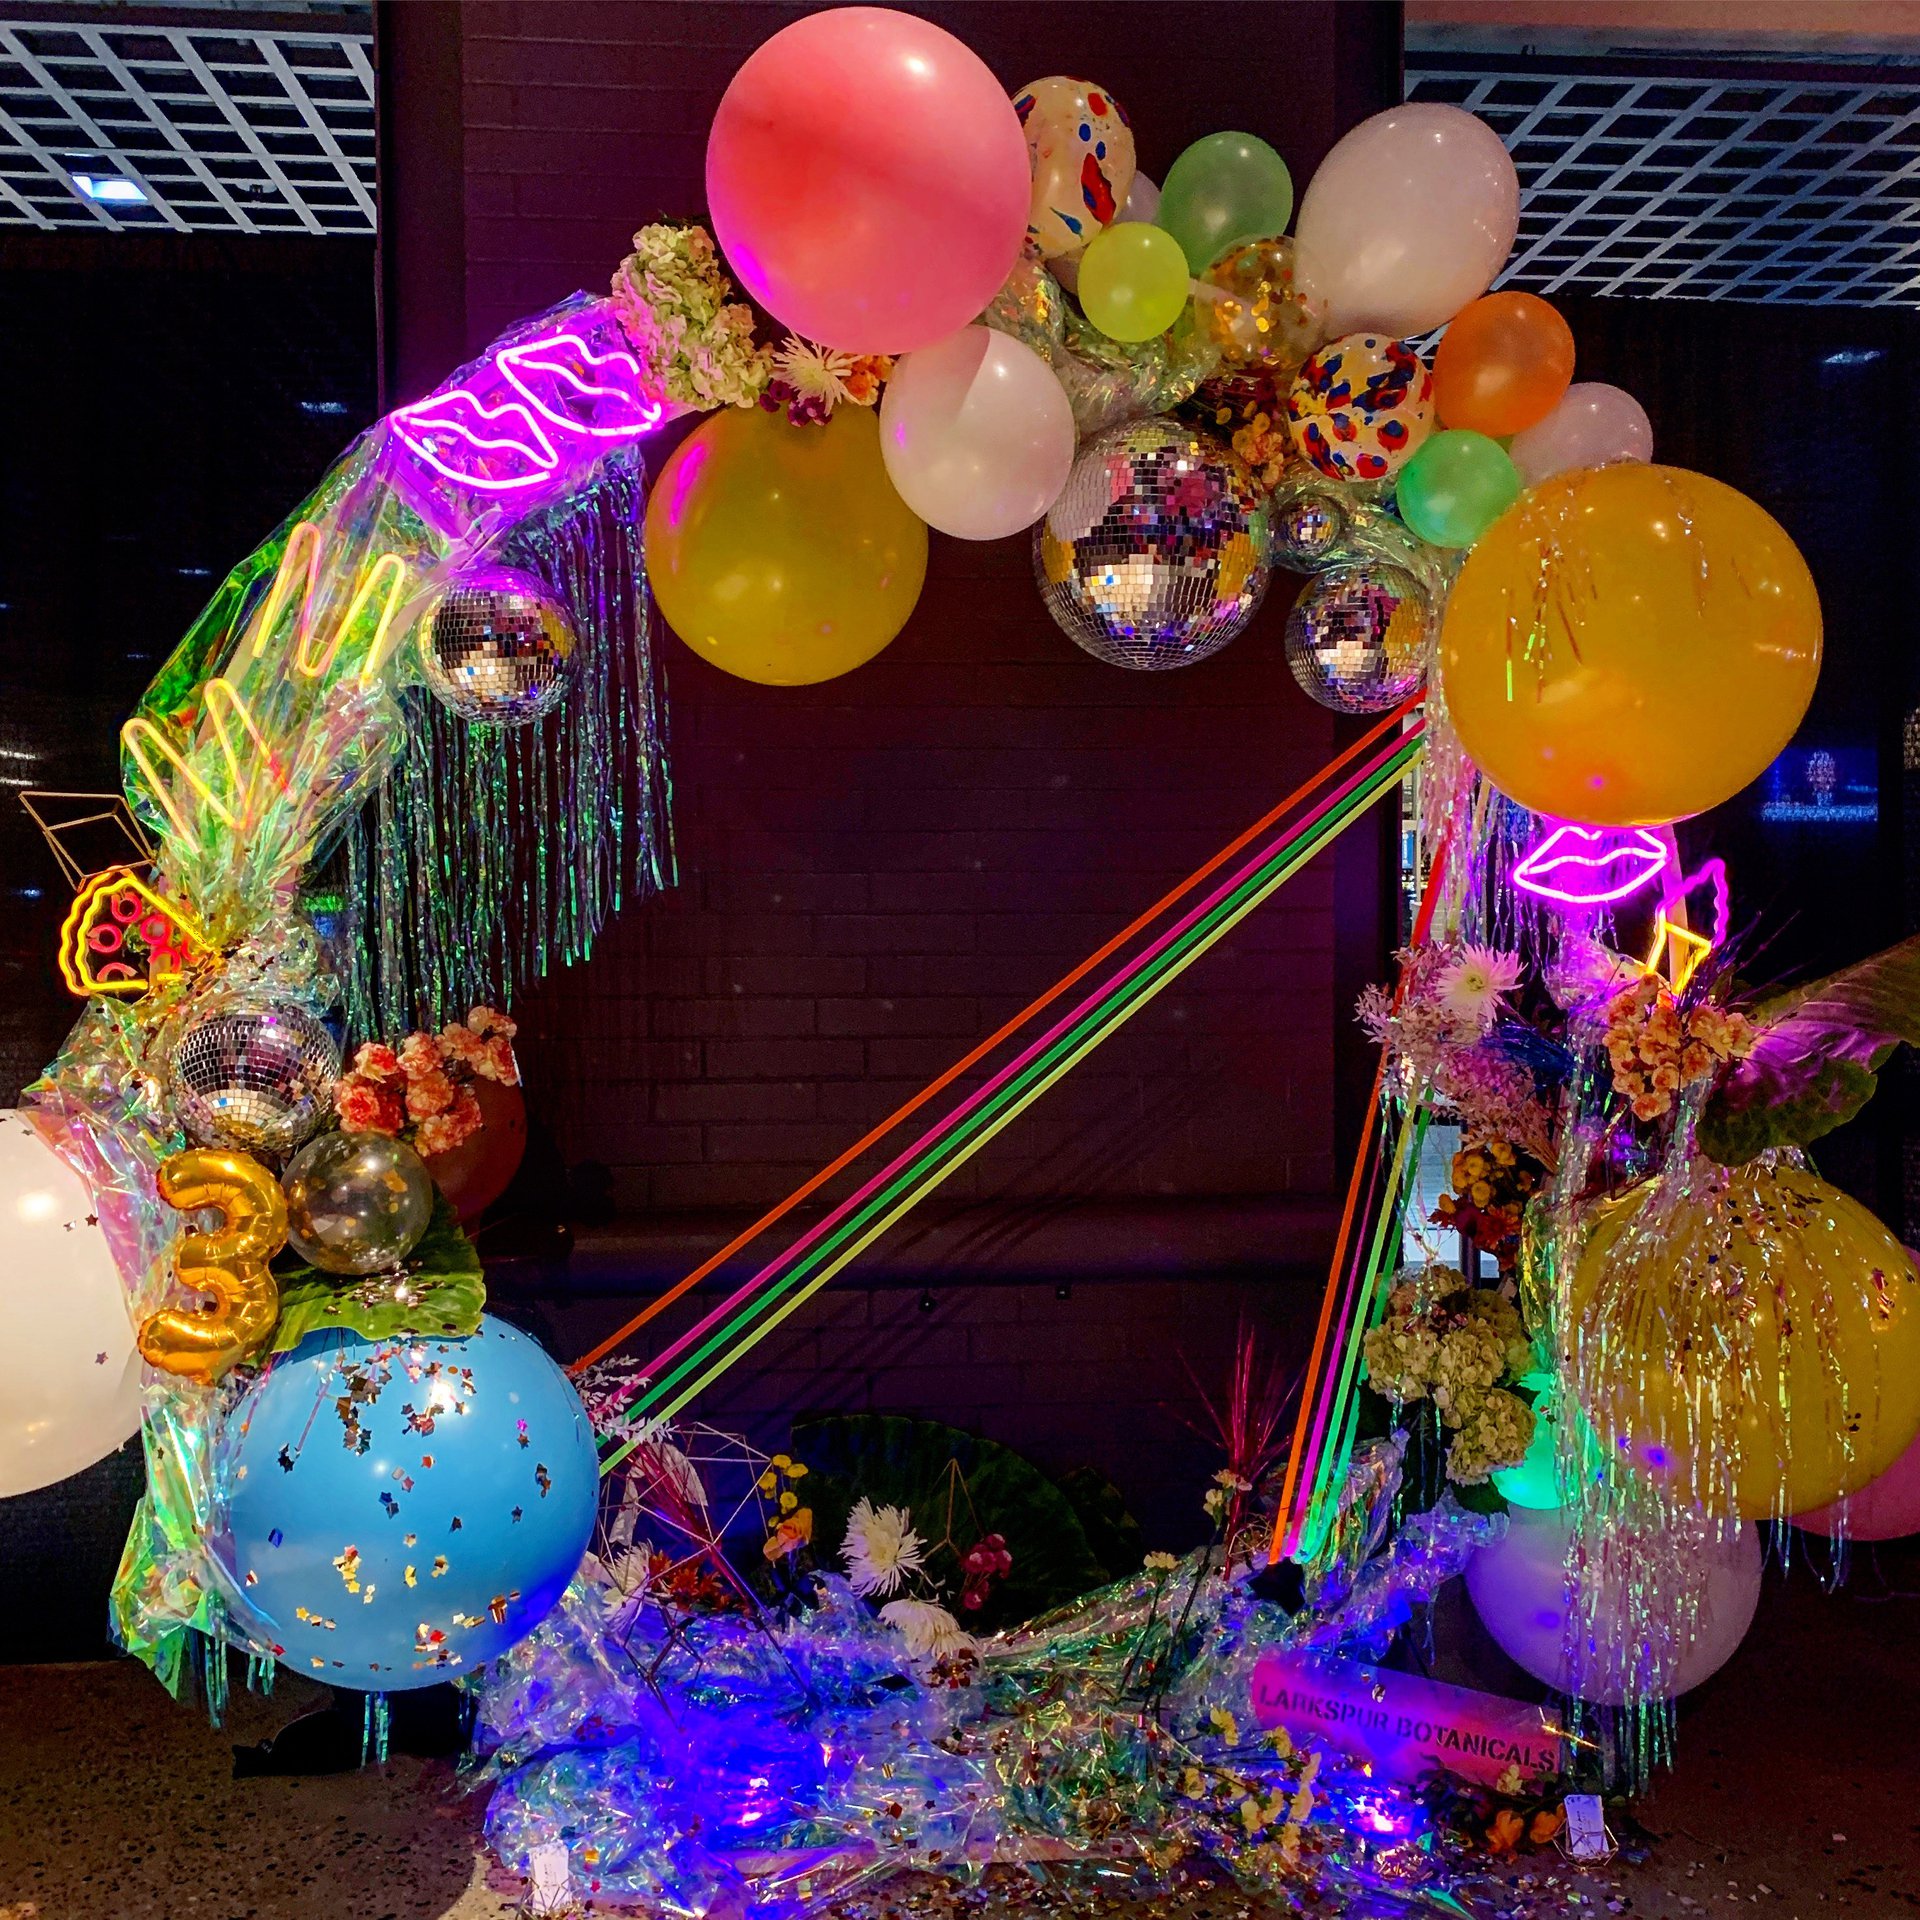 Reused tinsel and balloons by Larkspur Botanicals at the Midnight Market Neon Party. 